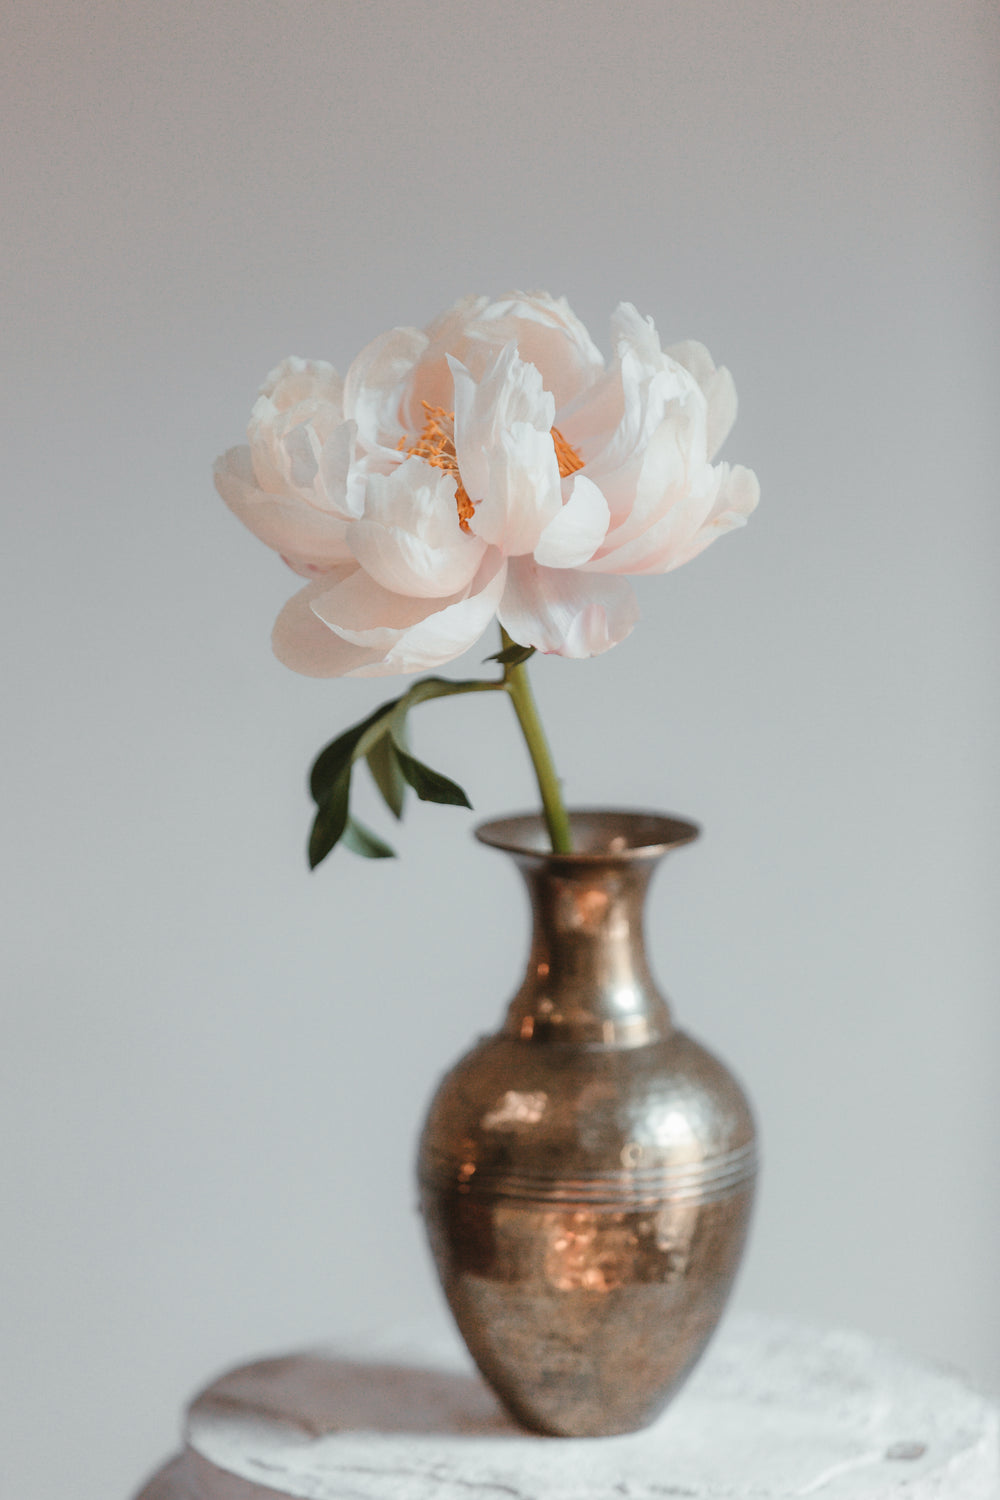 peony blossom in a vase